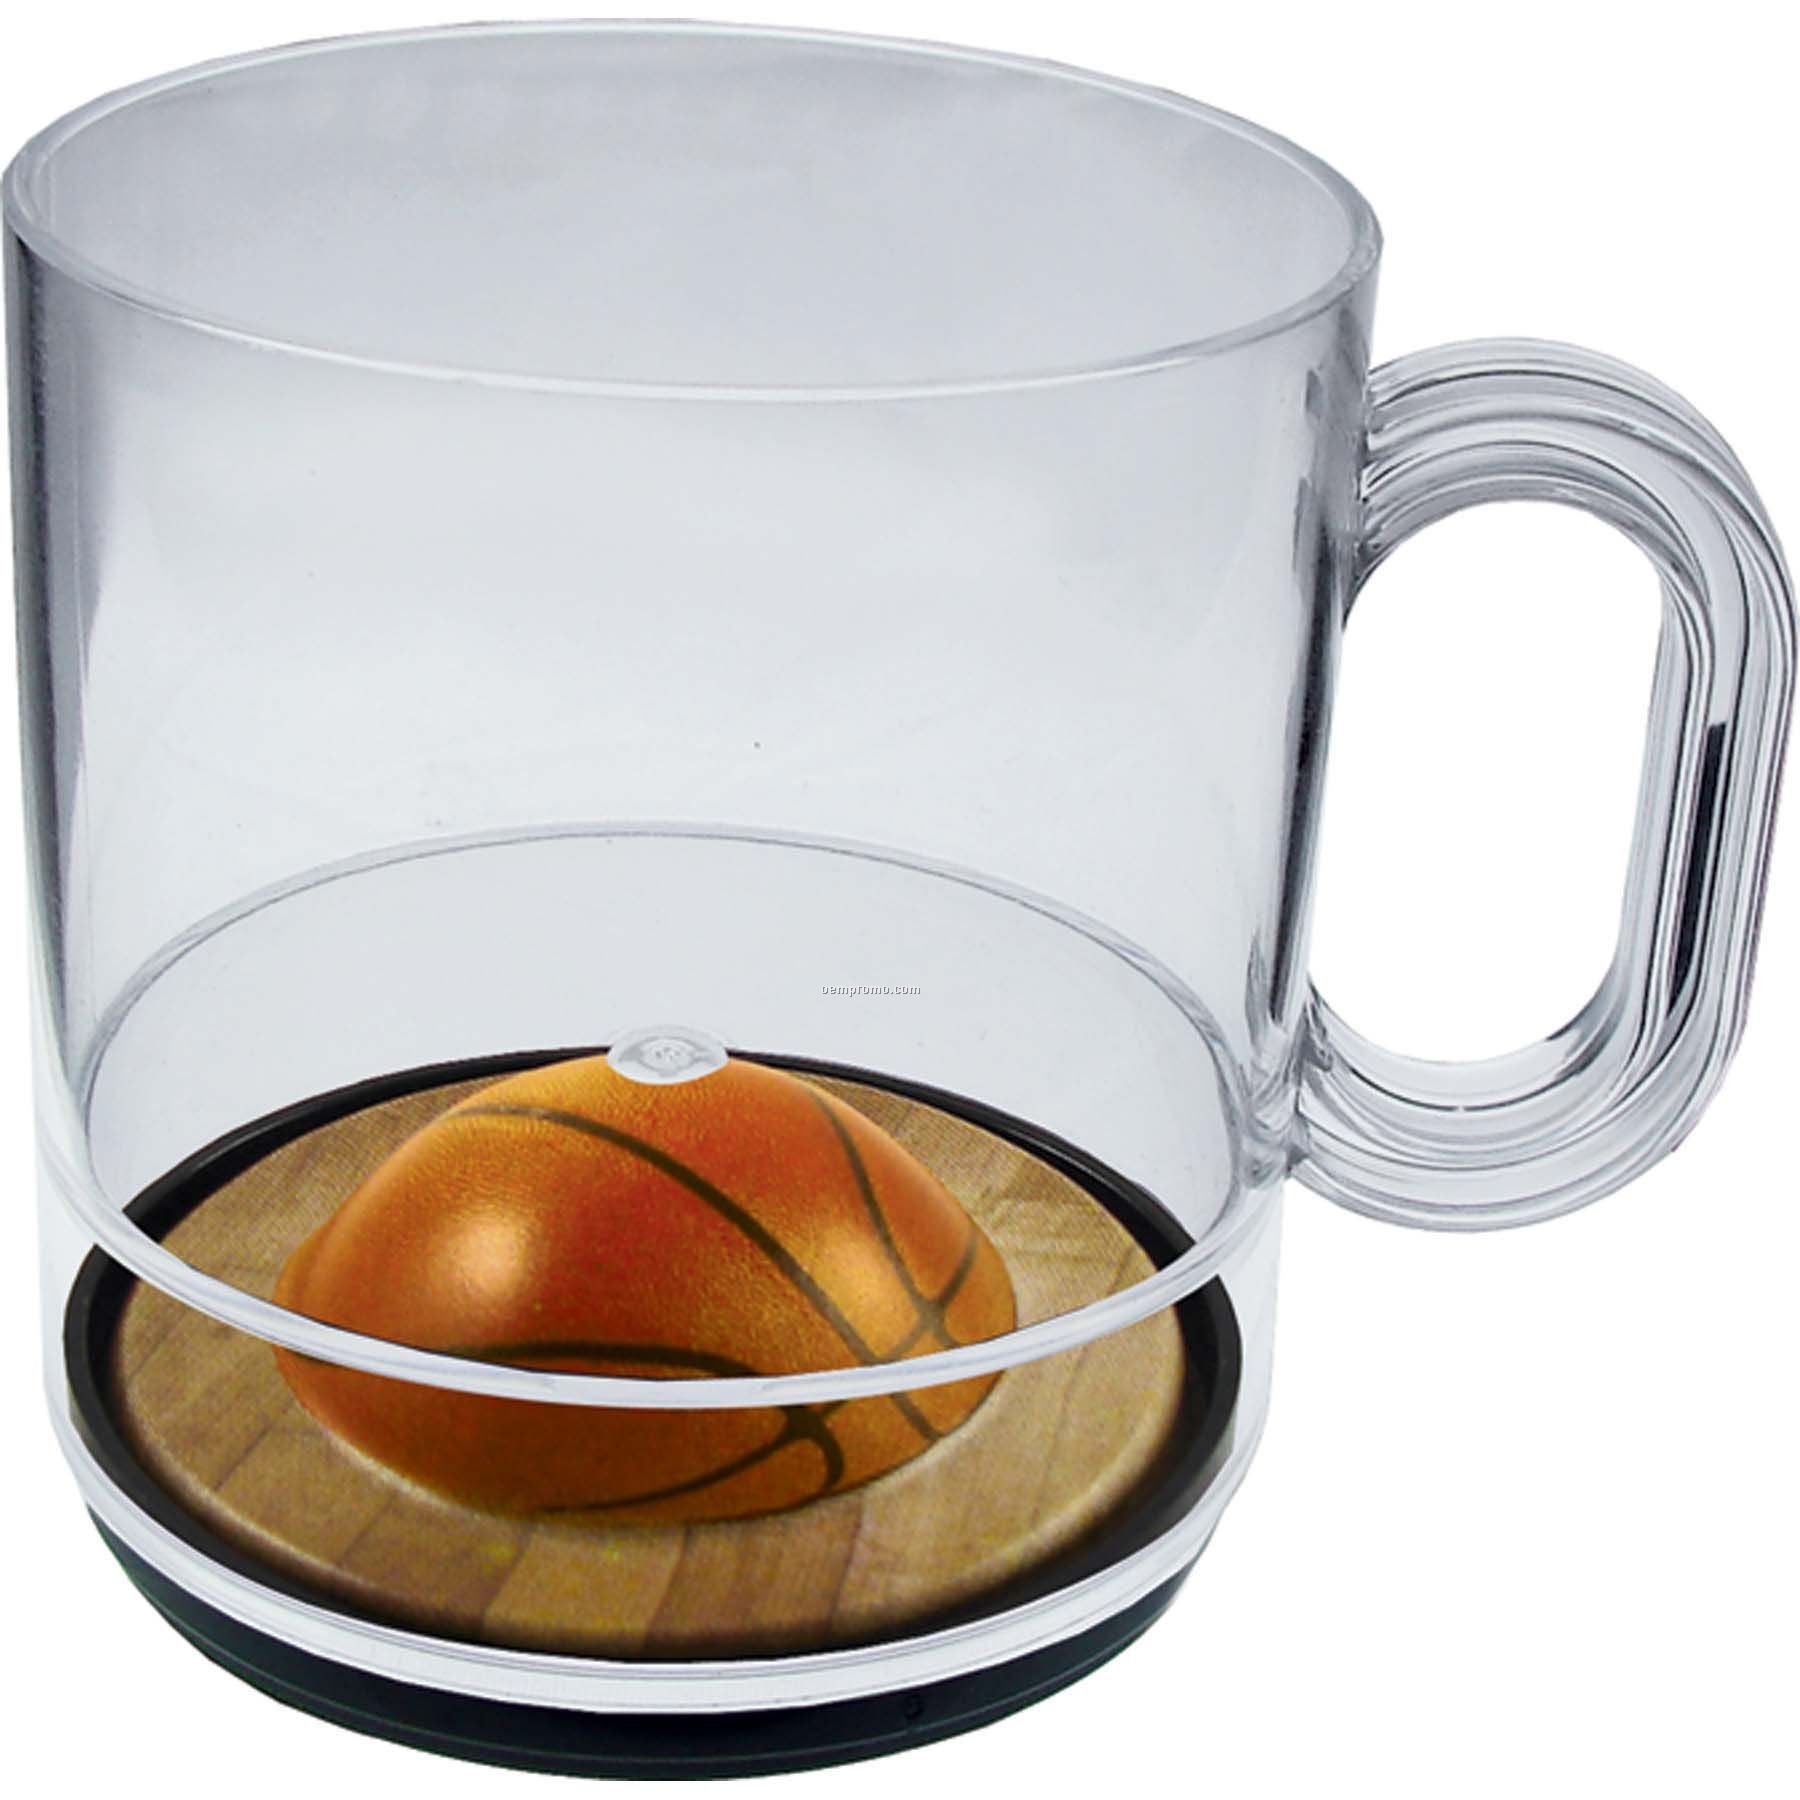 Nothin But Net 12 Oz. Compartment Coffee Mug